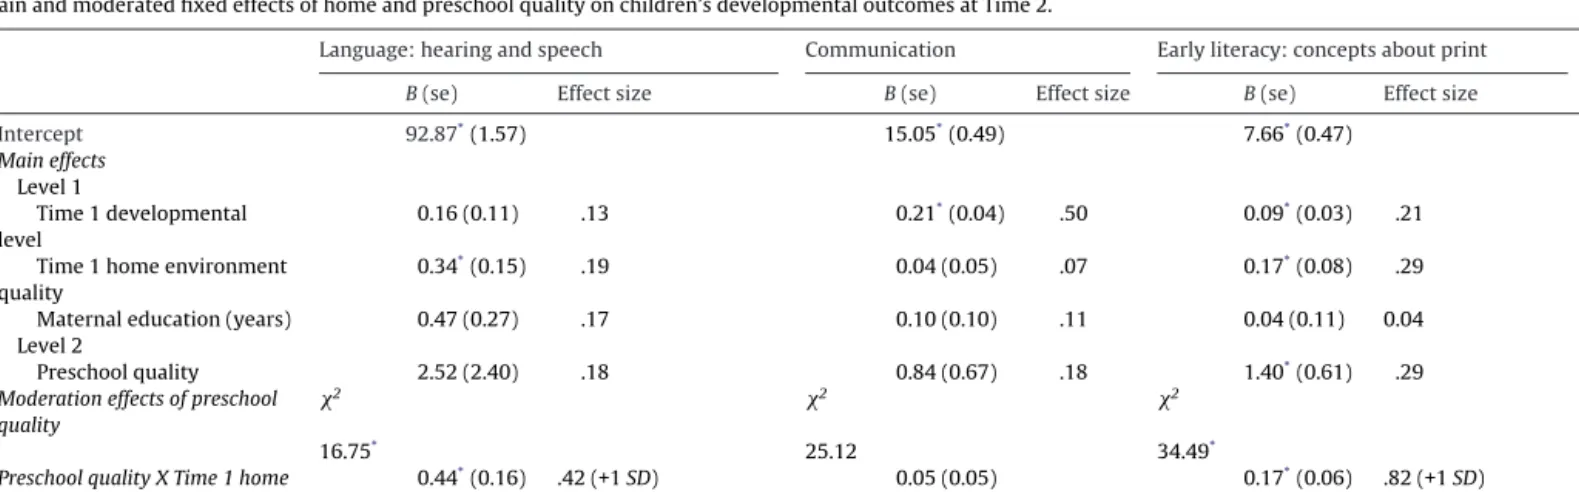 Table 2 presents a matrix displaying bivariate correlations between children’s developmental level, children’s language,  com-munication, and early literacy skills, home environment quality, maternal education, overall quality of center-based toddler child